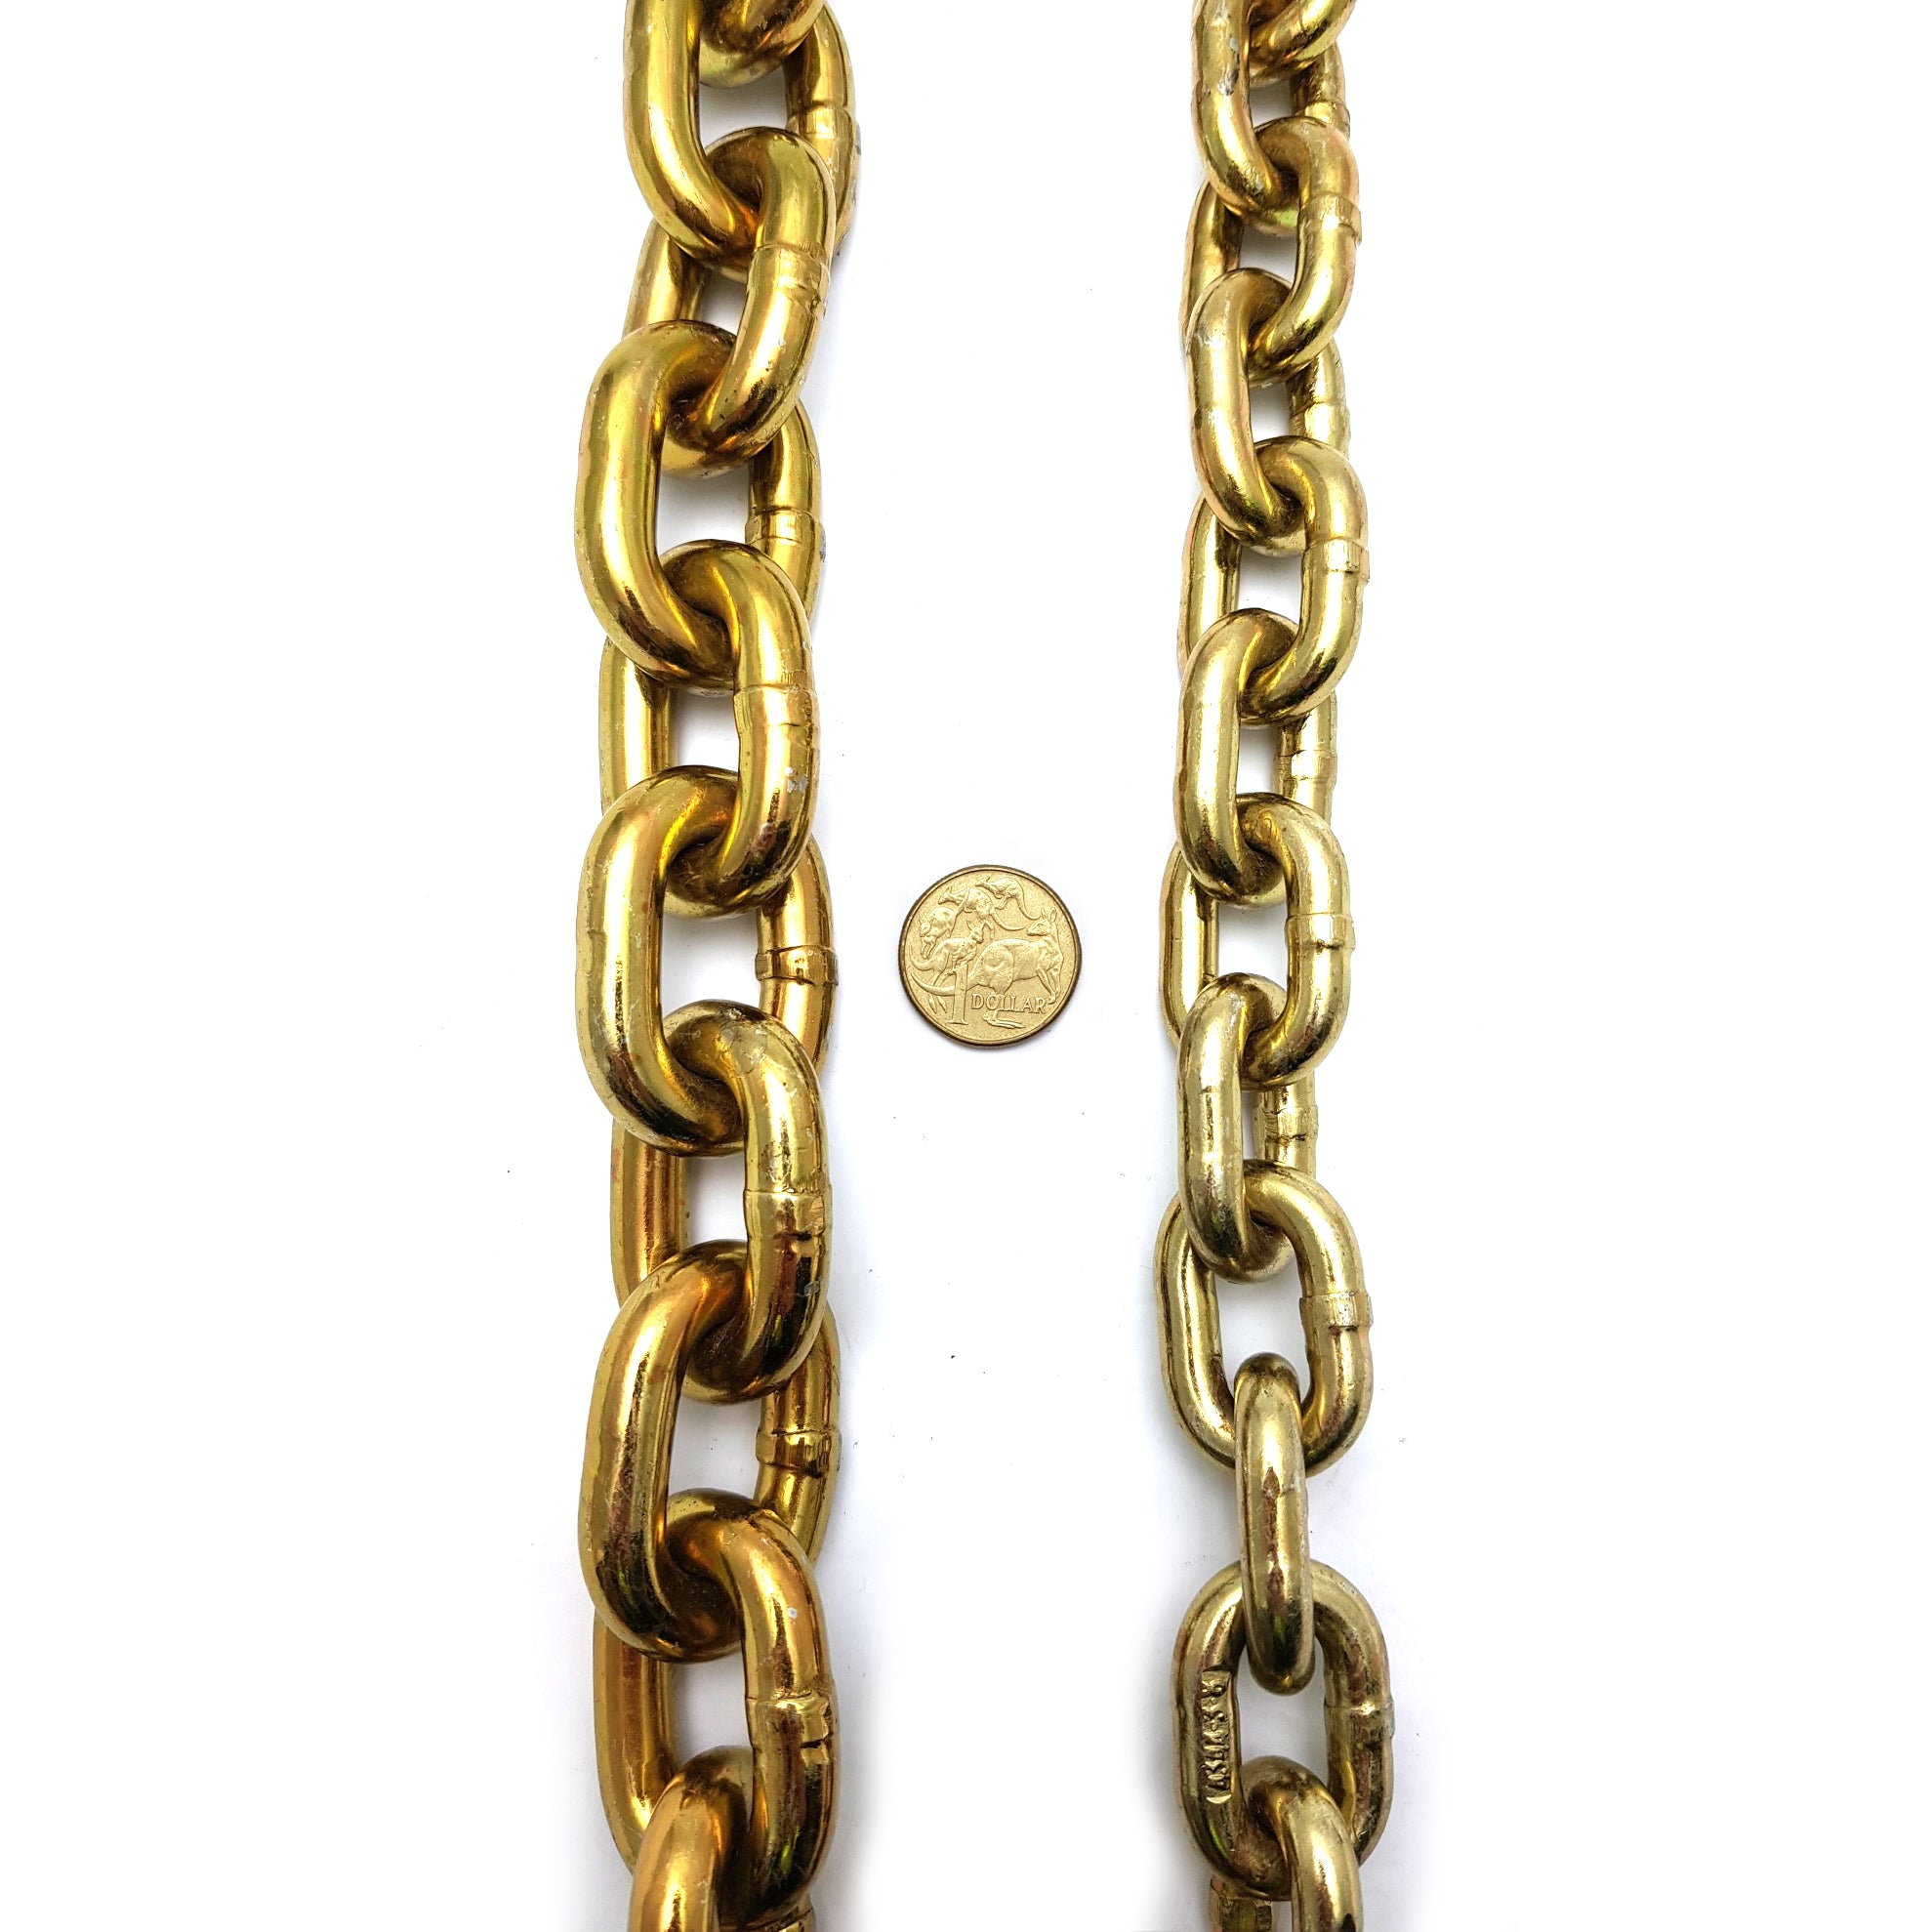 Hardened security chain, size: 10mm and 8mm, order 1 metre. Australia wide delivery.